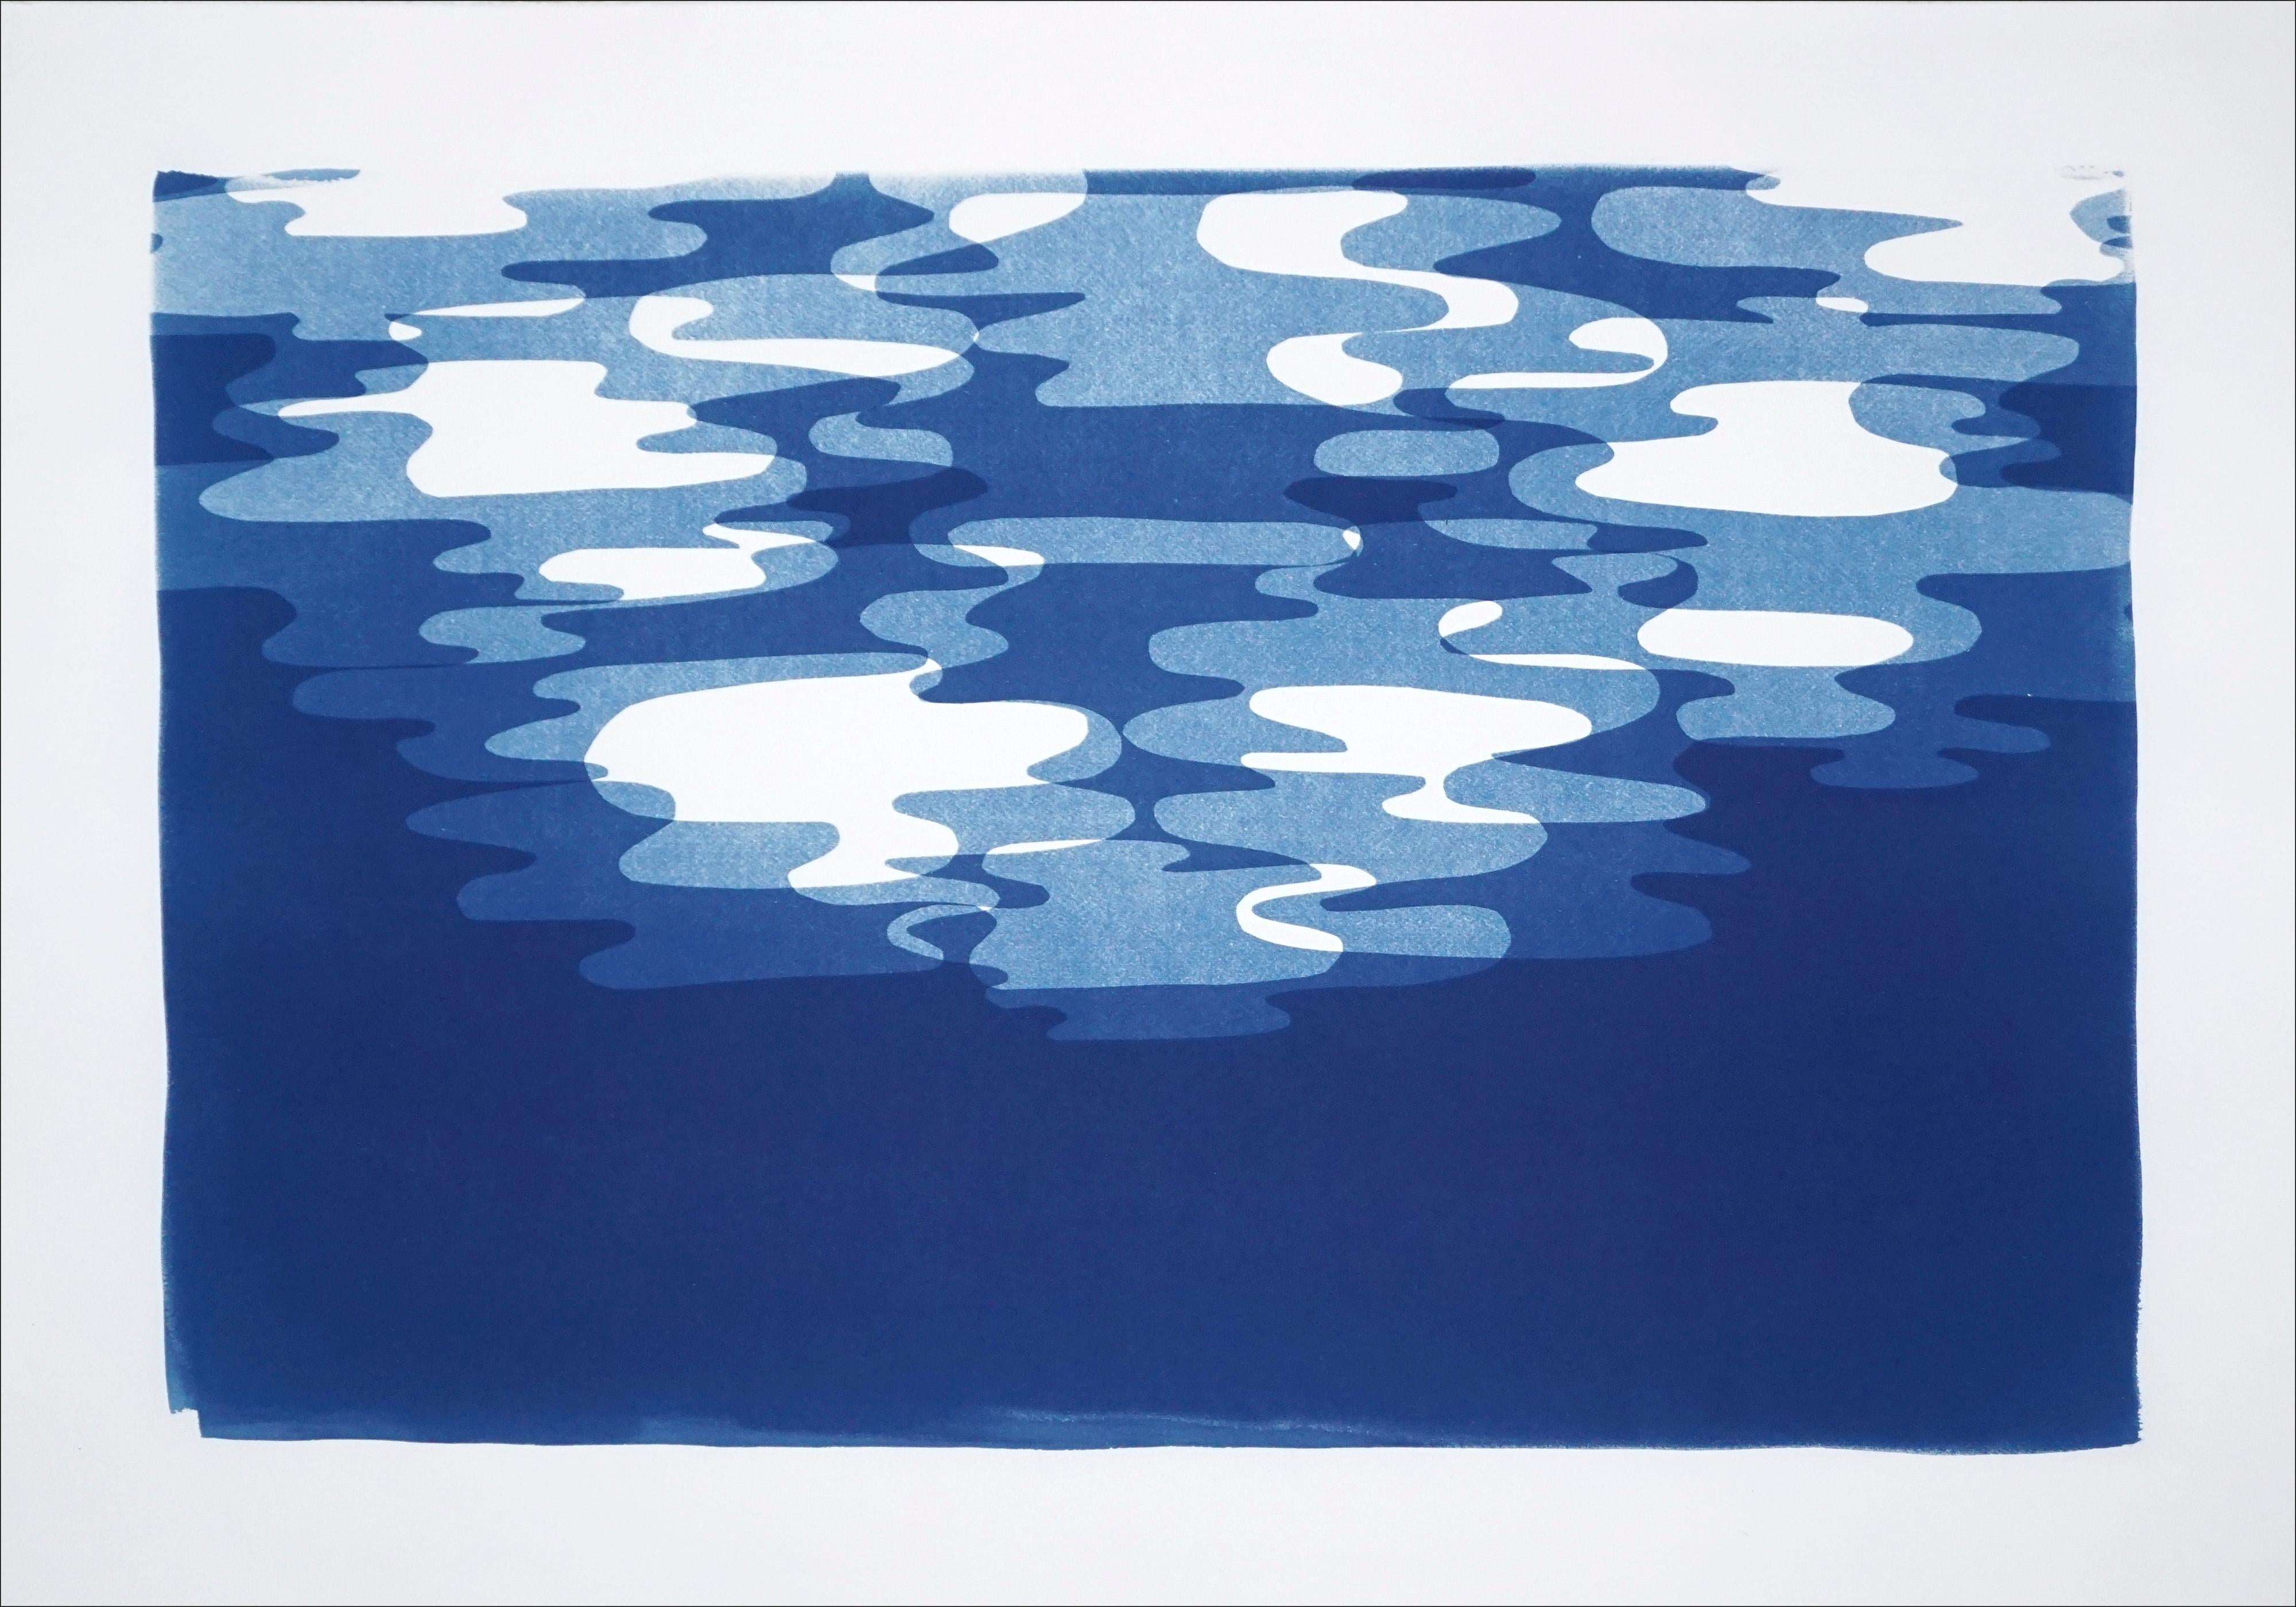 Handmade Cutouts Monotype, Blue and White Moonlight Reflection Contours, Unique